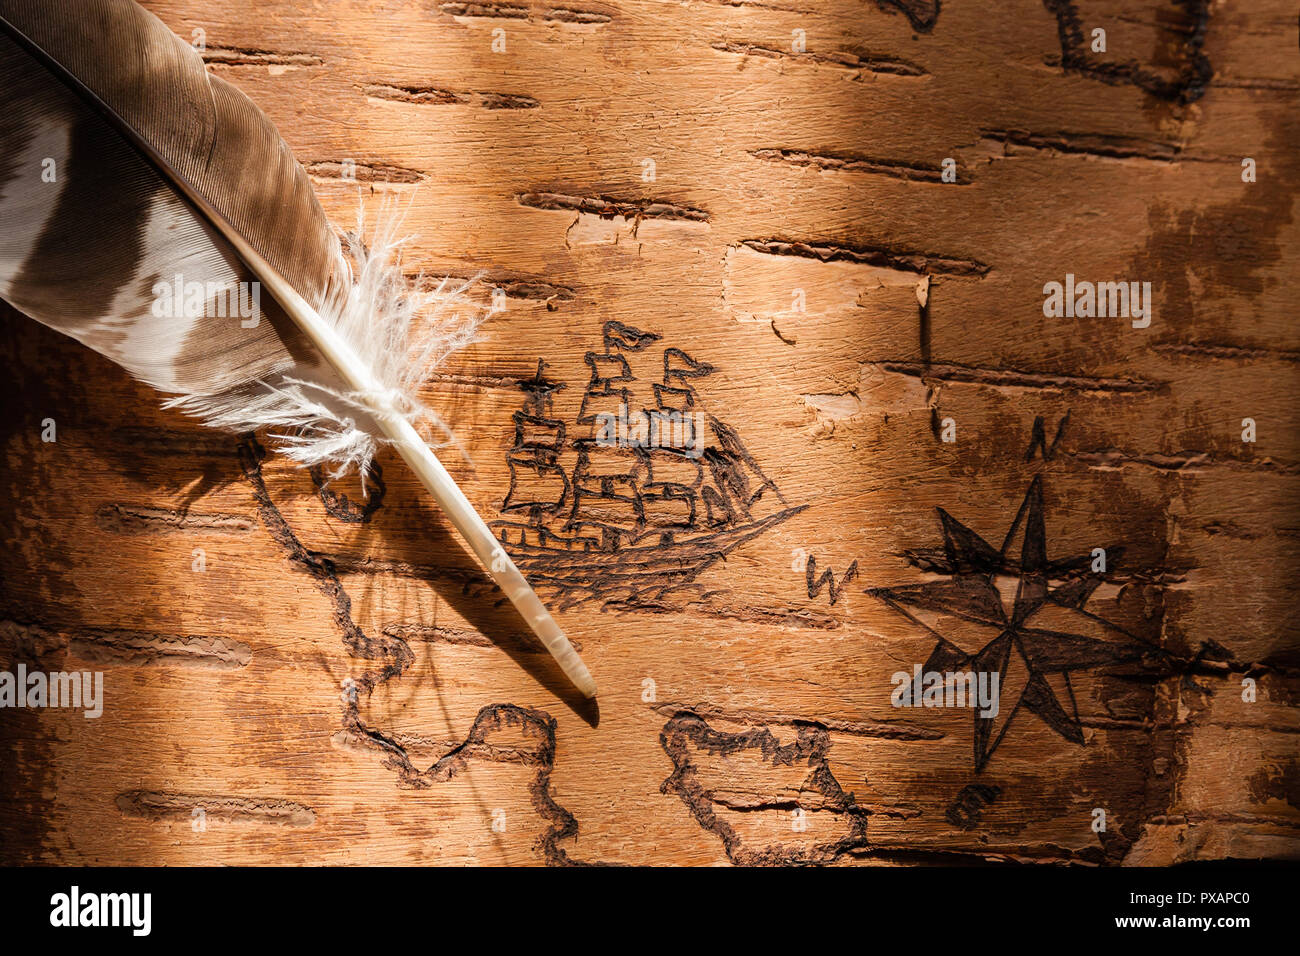 Sea map with illustrations of sailing vessels and compass rose on the order of antiquities on birchbark Stock Photo